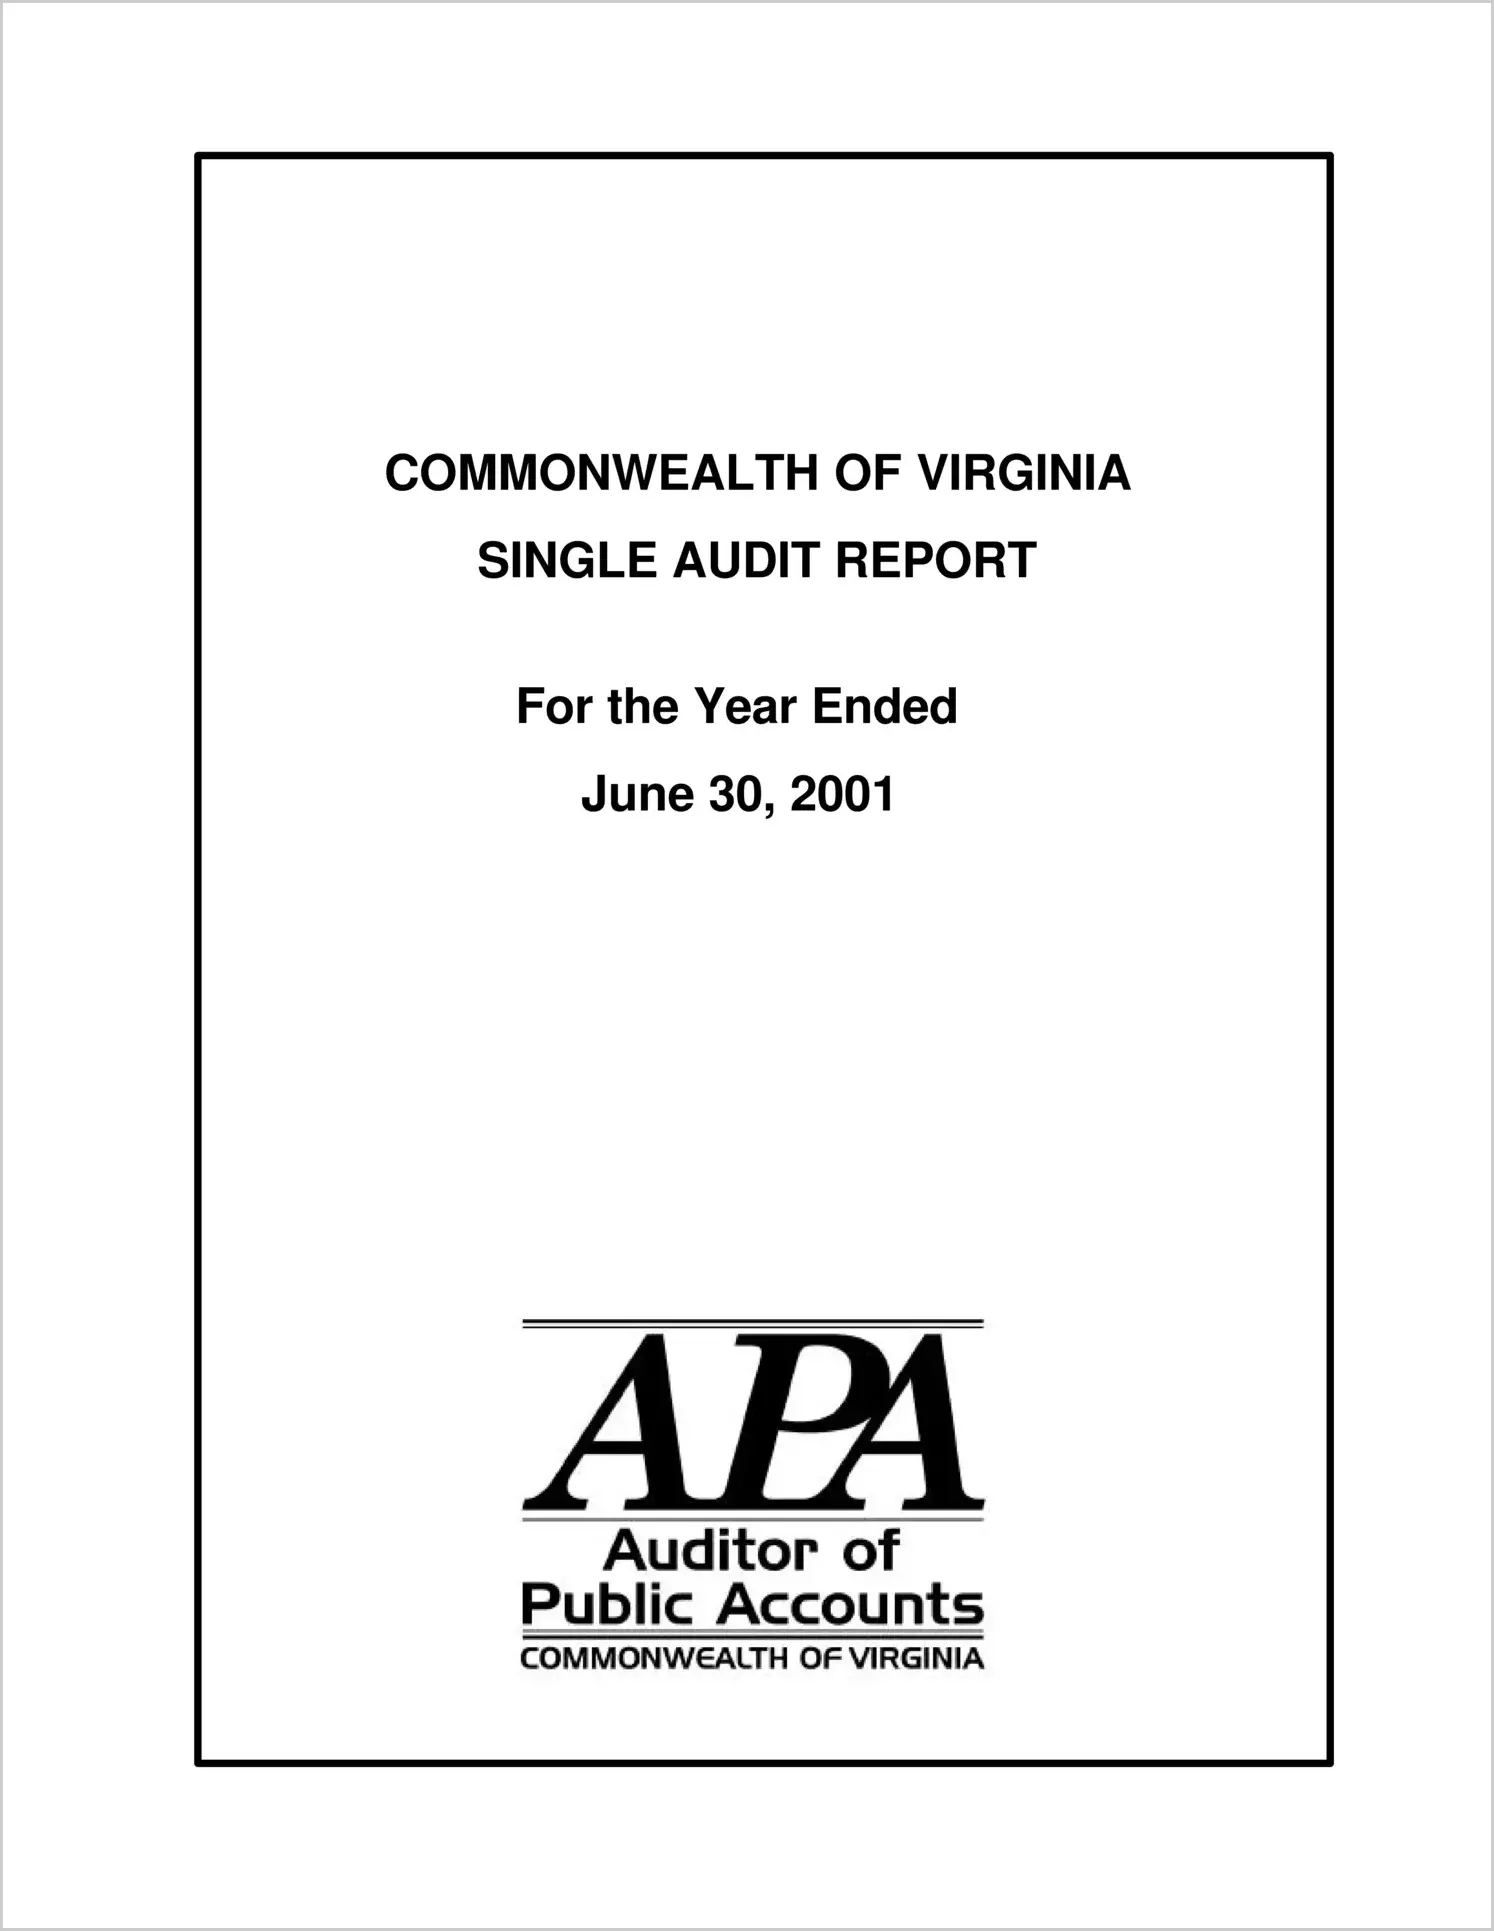 Commonwealth of Virginia Single Audit Report for the Year Ended June 30, 2001